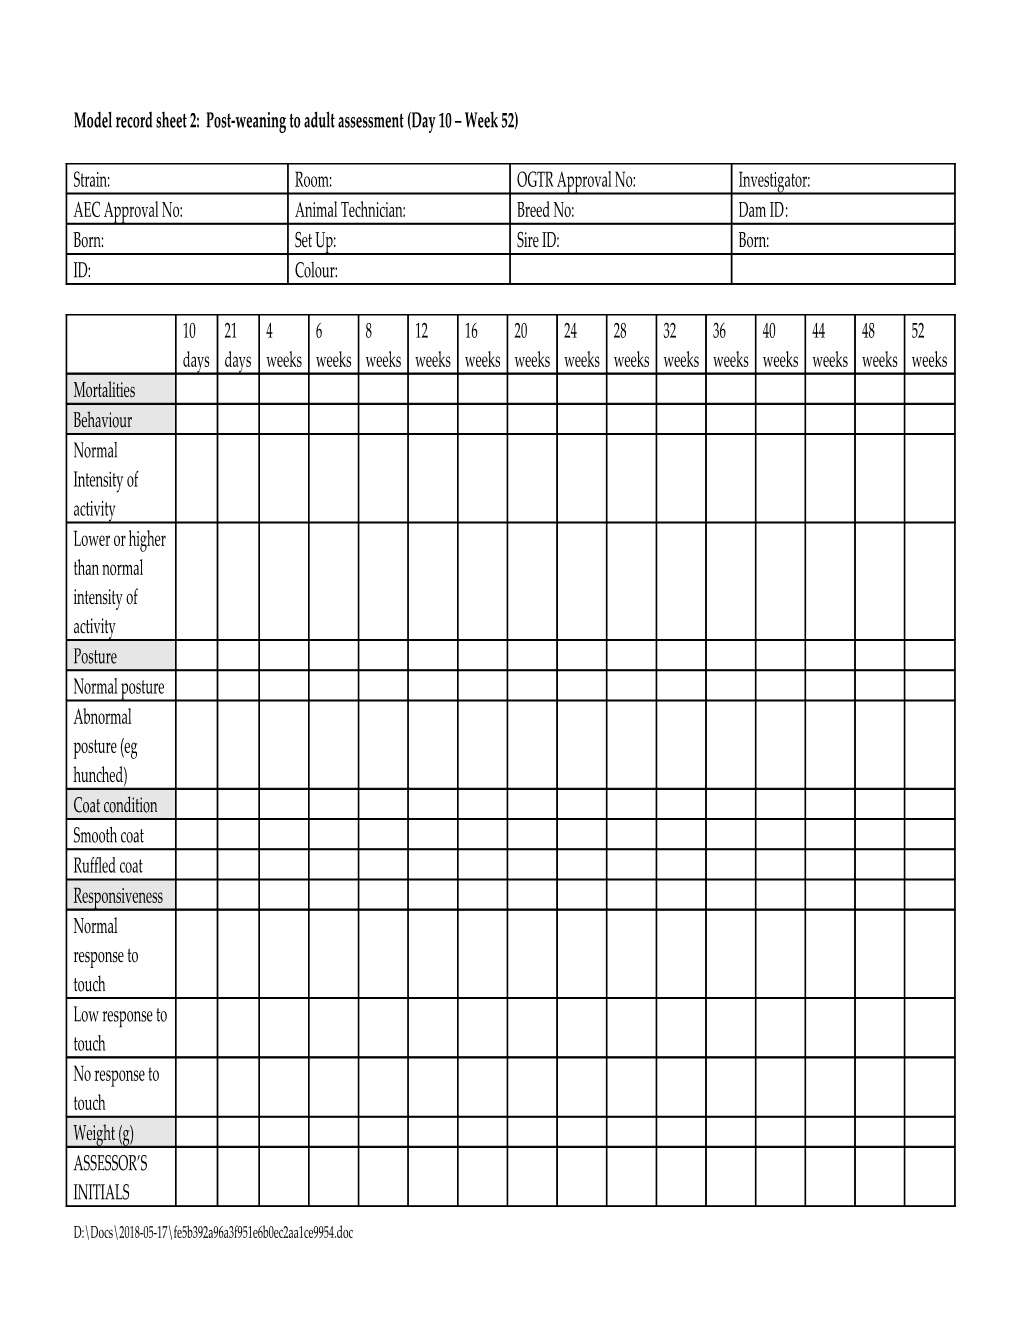 APPENDIX 2 Example Record Sheets (May Be Modified Or Amended to Suit Individual Requirements)